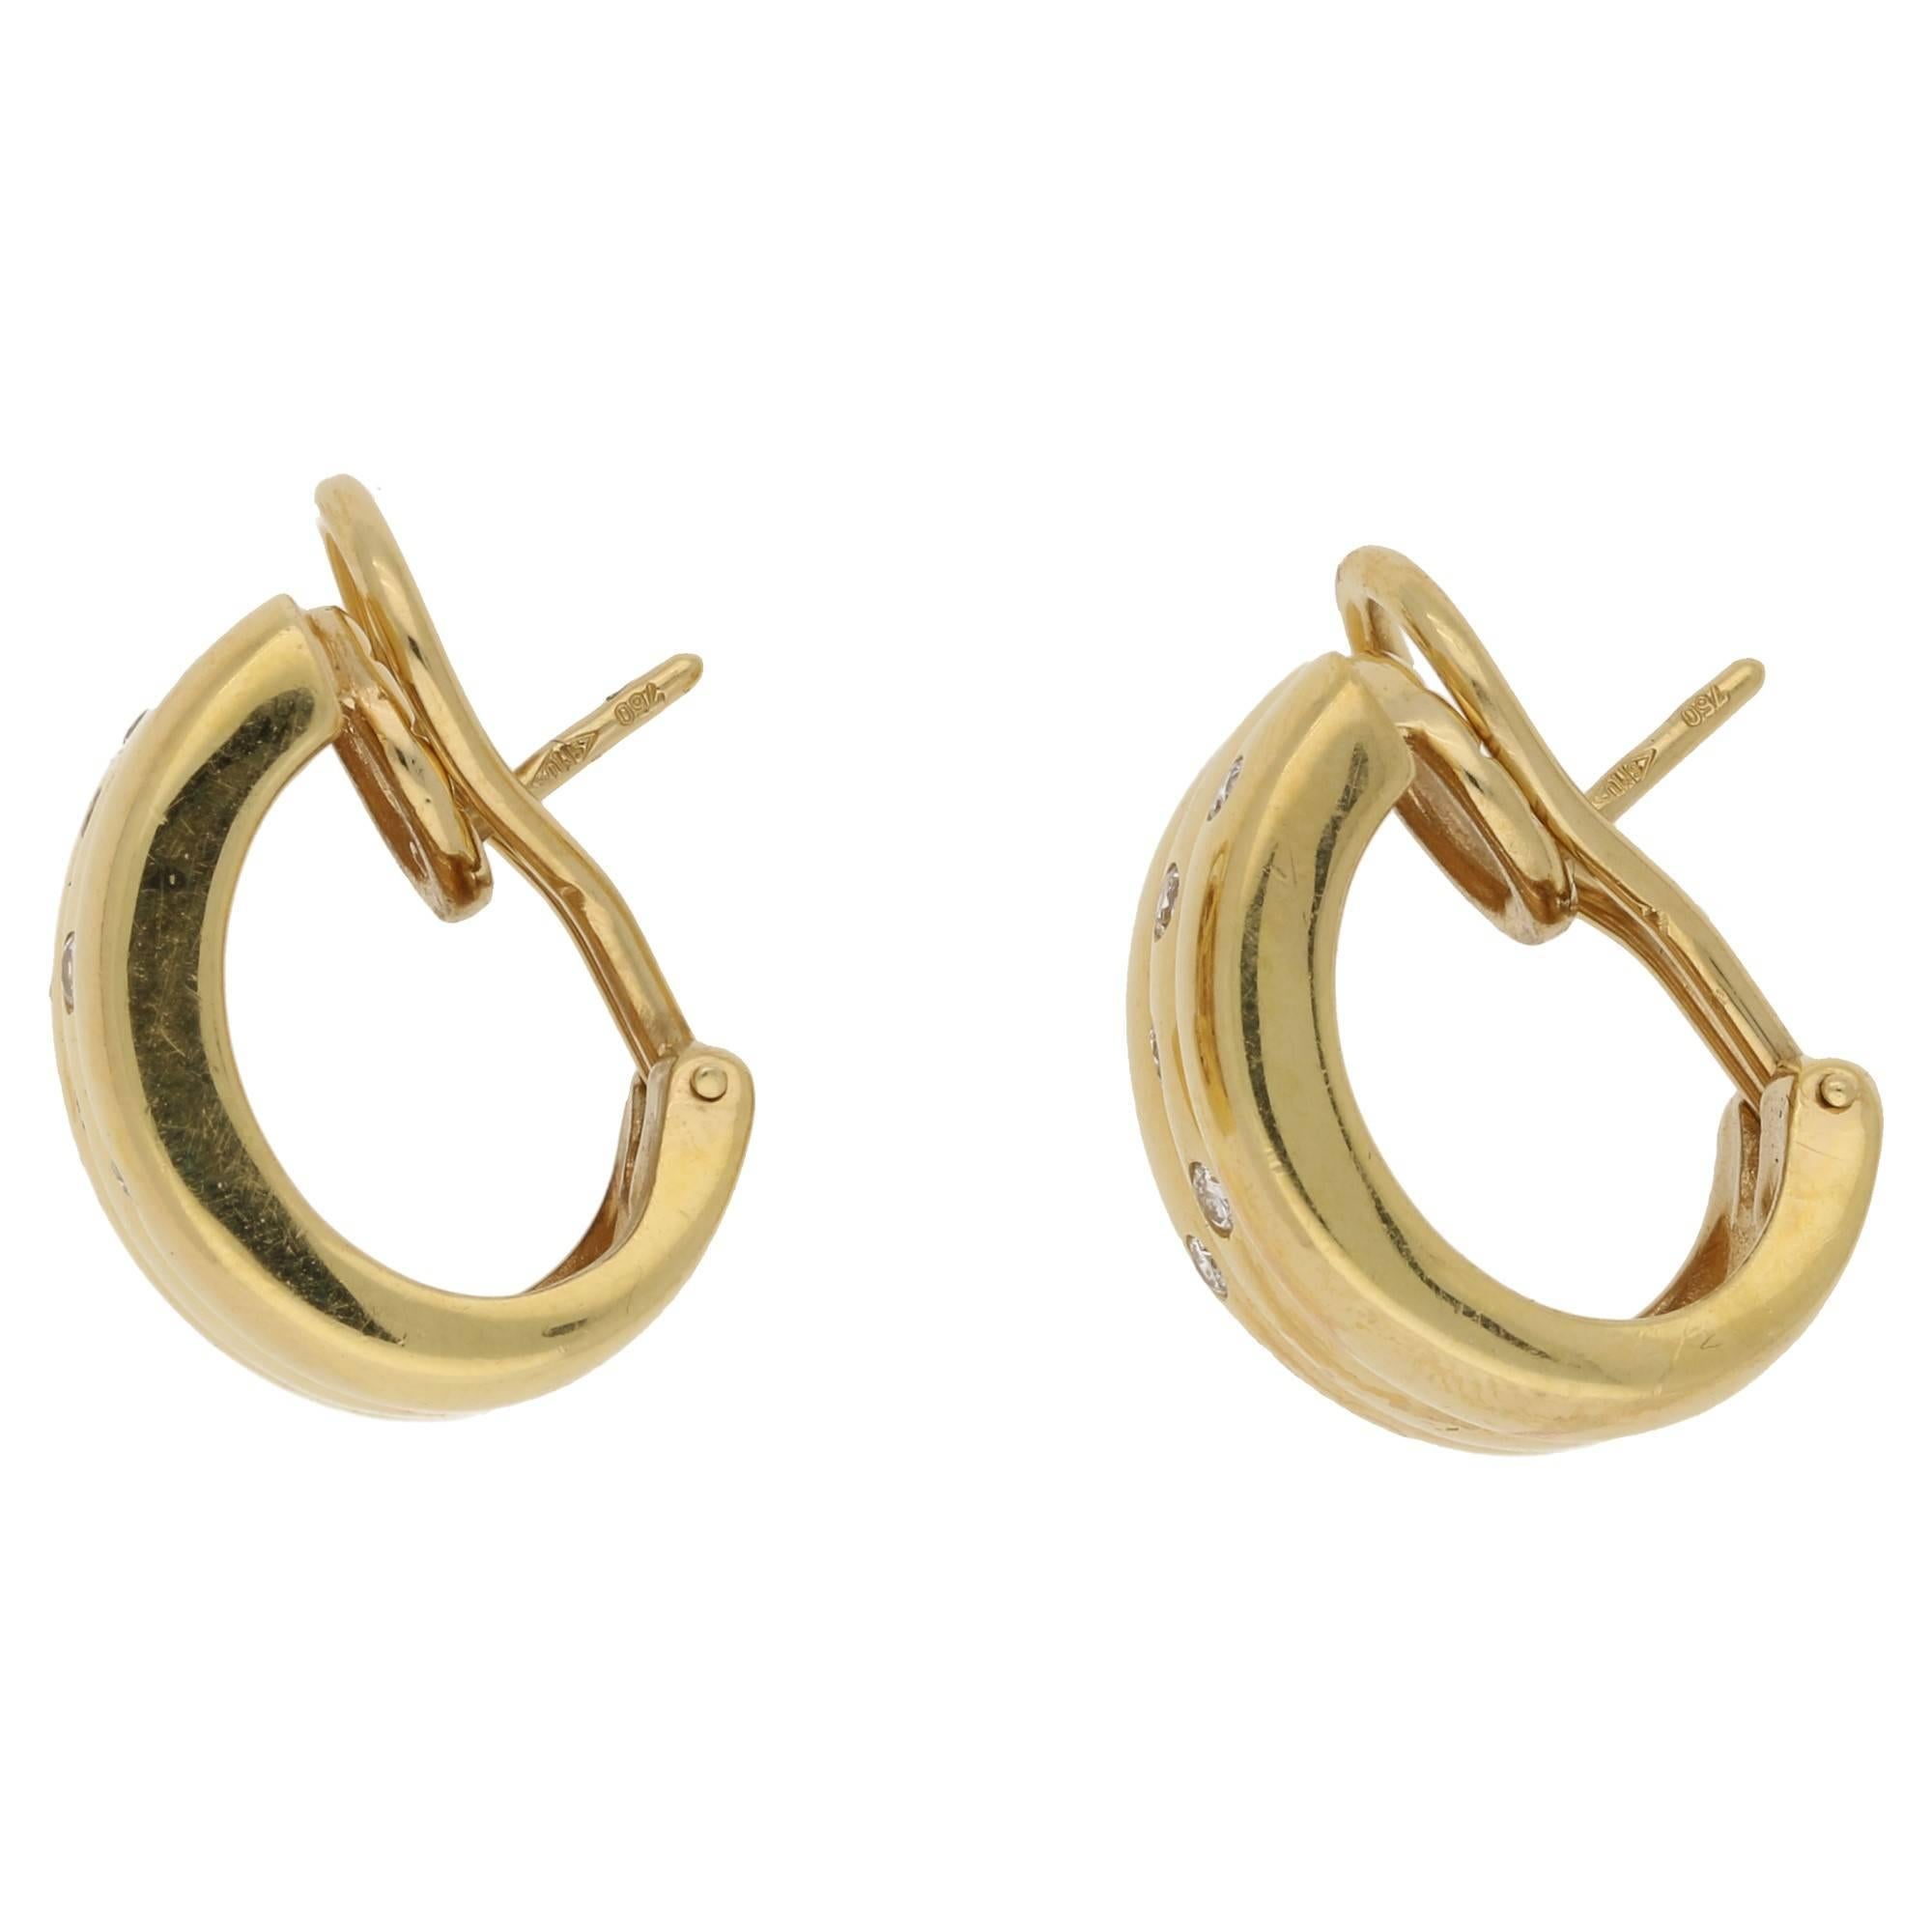 A chunky vintage pair of 18ct gold earrings set with interspersed round brilliant diamonds. On post and clip fittings.